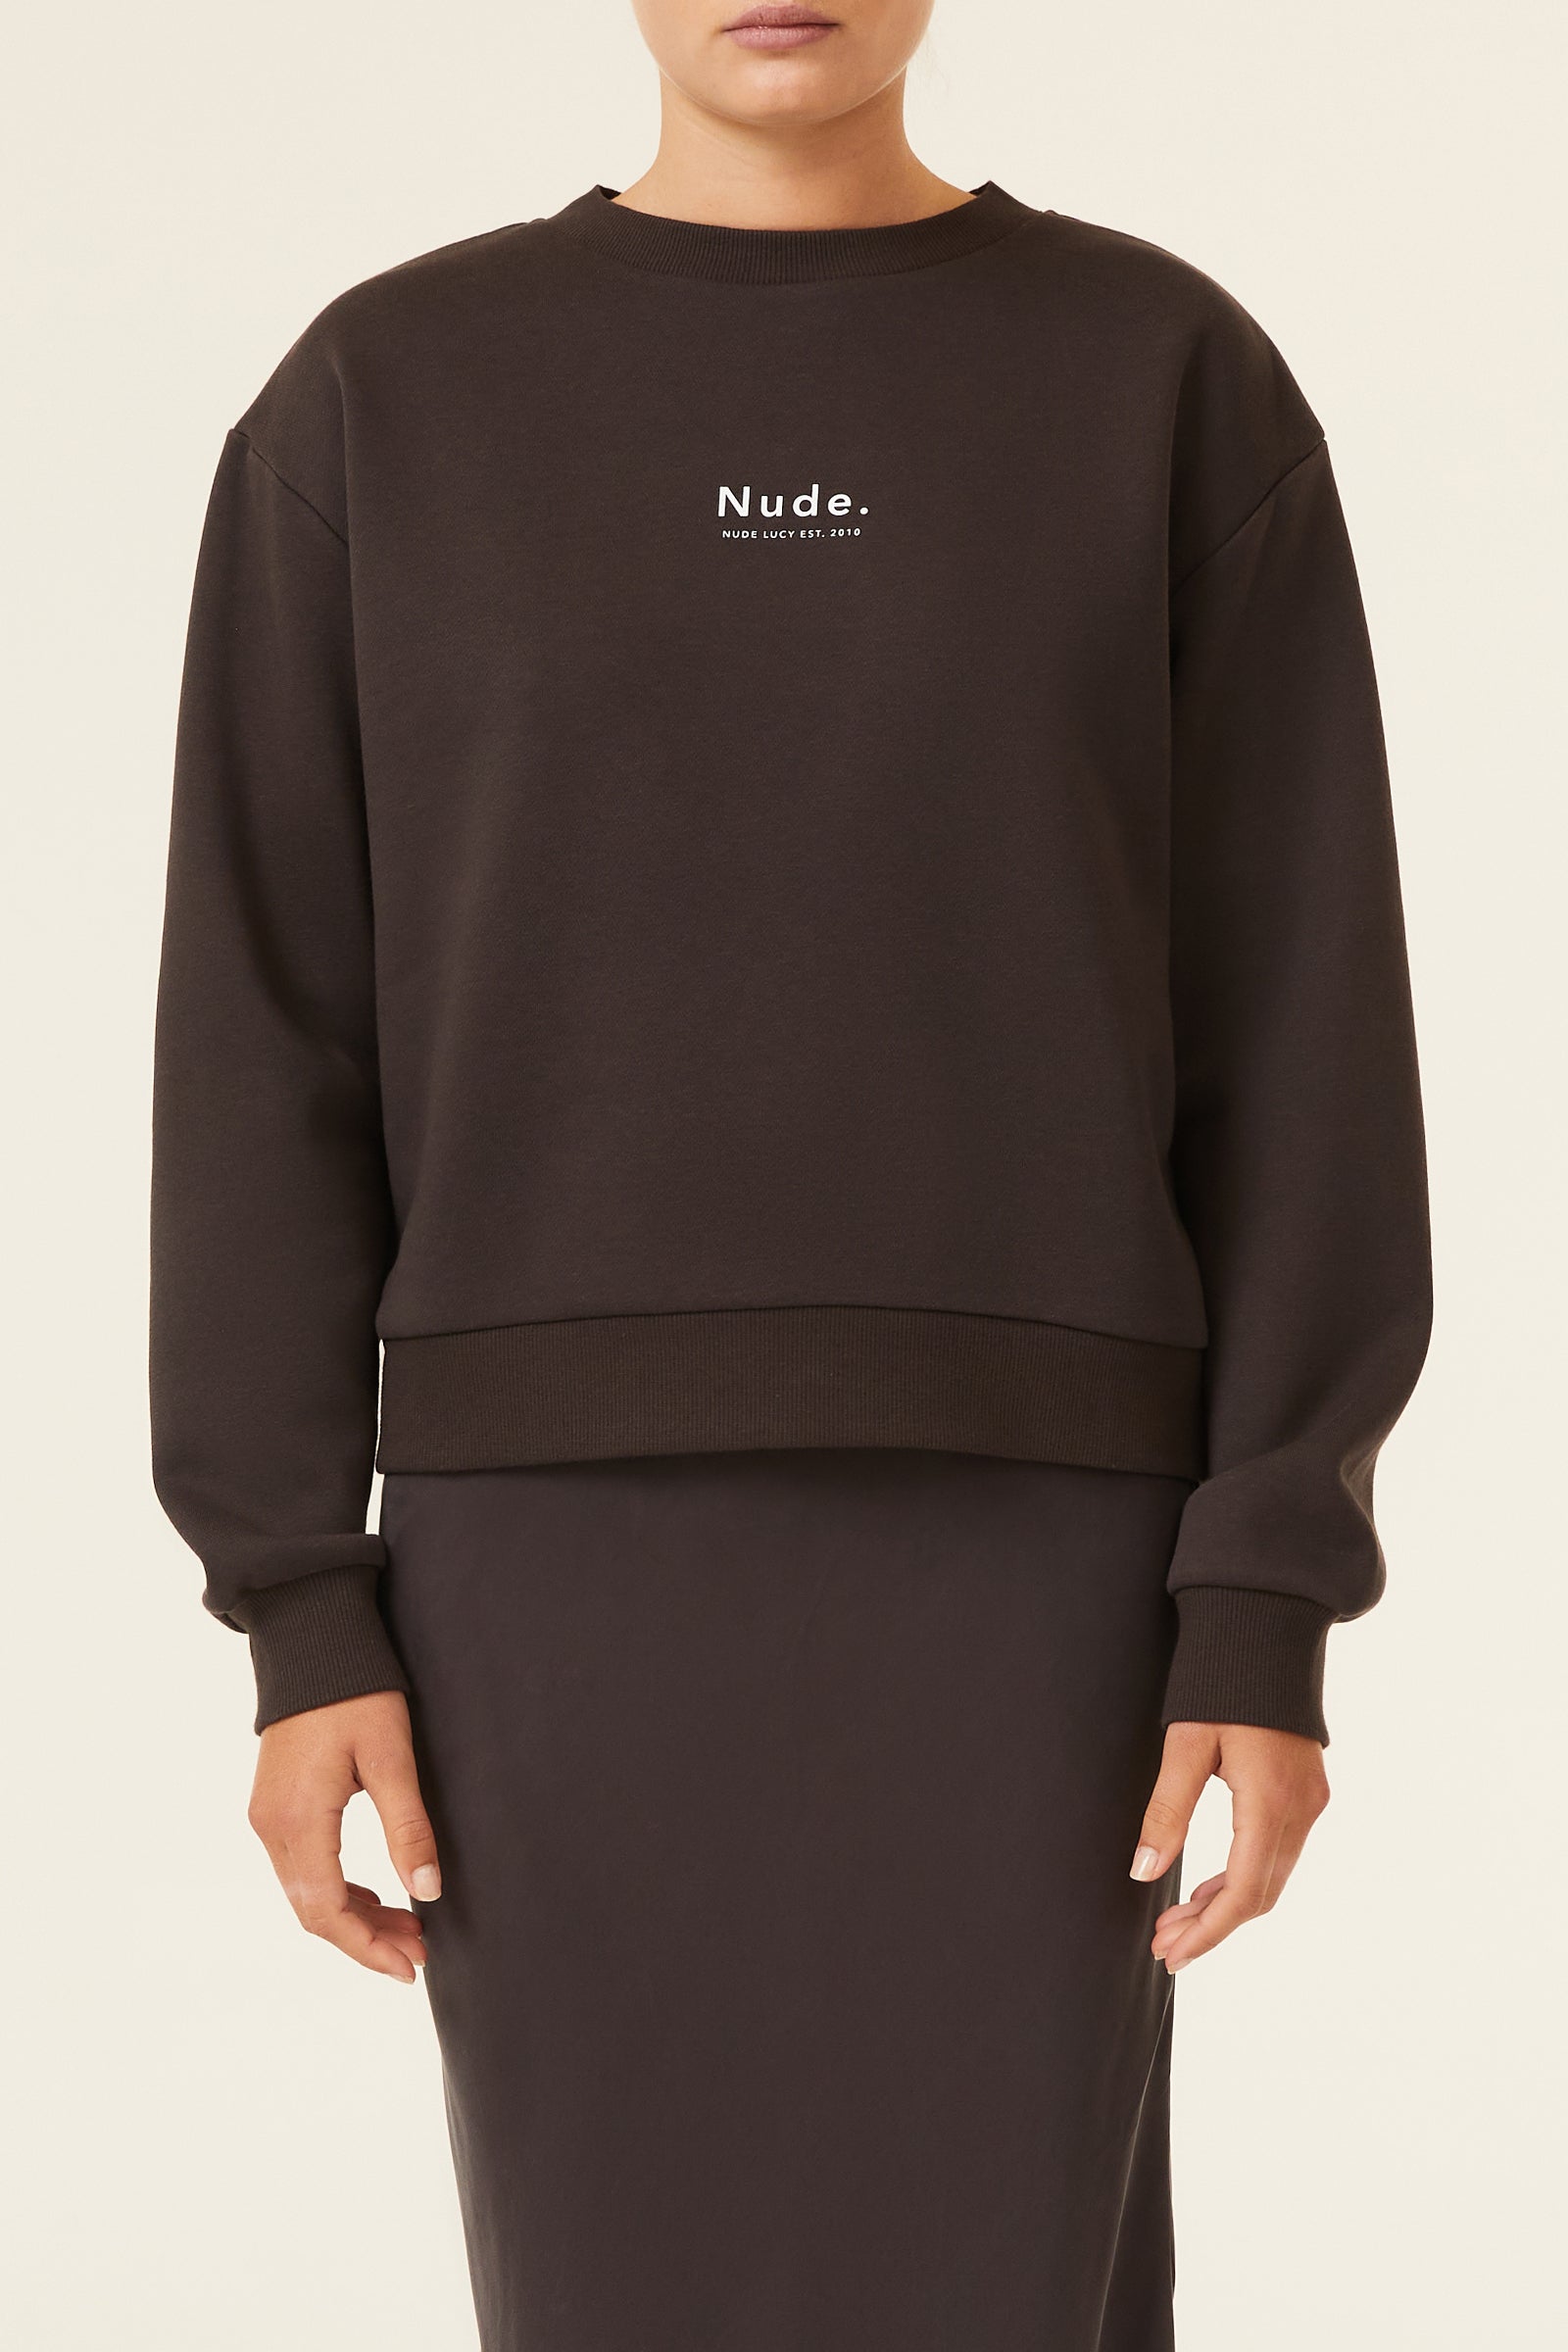 Nude Lucy Nude Heritage Sweat in a Dark Grey In a Brown Coal Colour